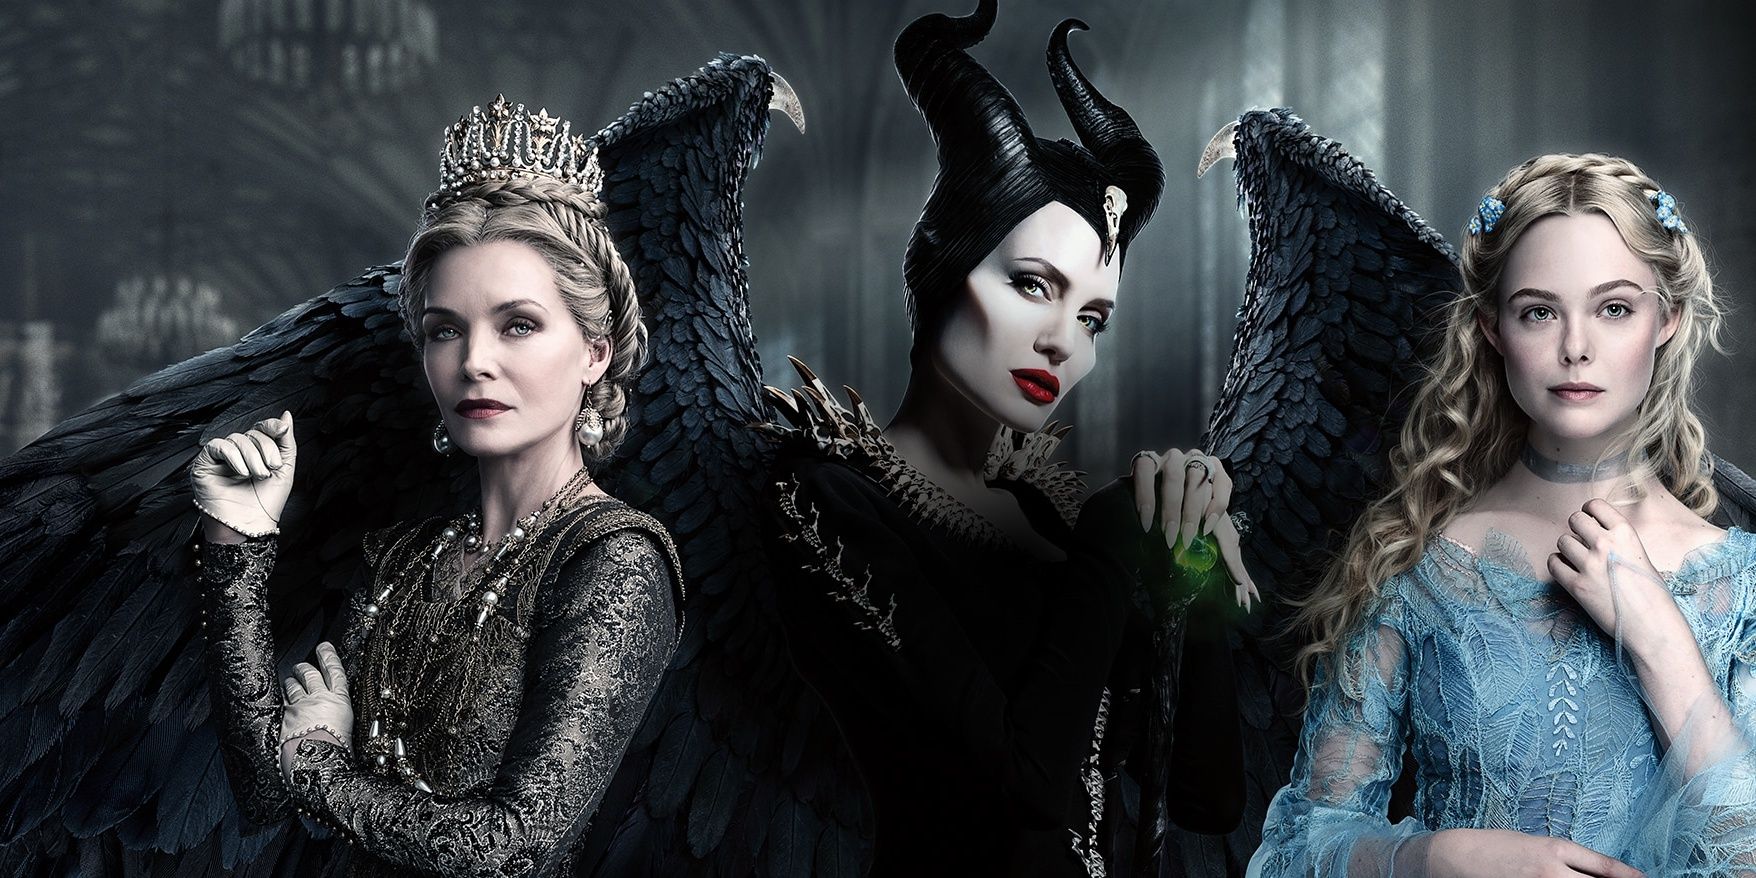 Queen Ingrith, Maleficent, and Aurora face the camera on a movie poster for Disney's Maleficent